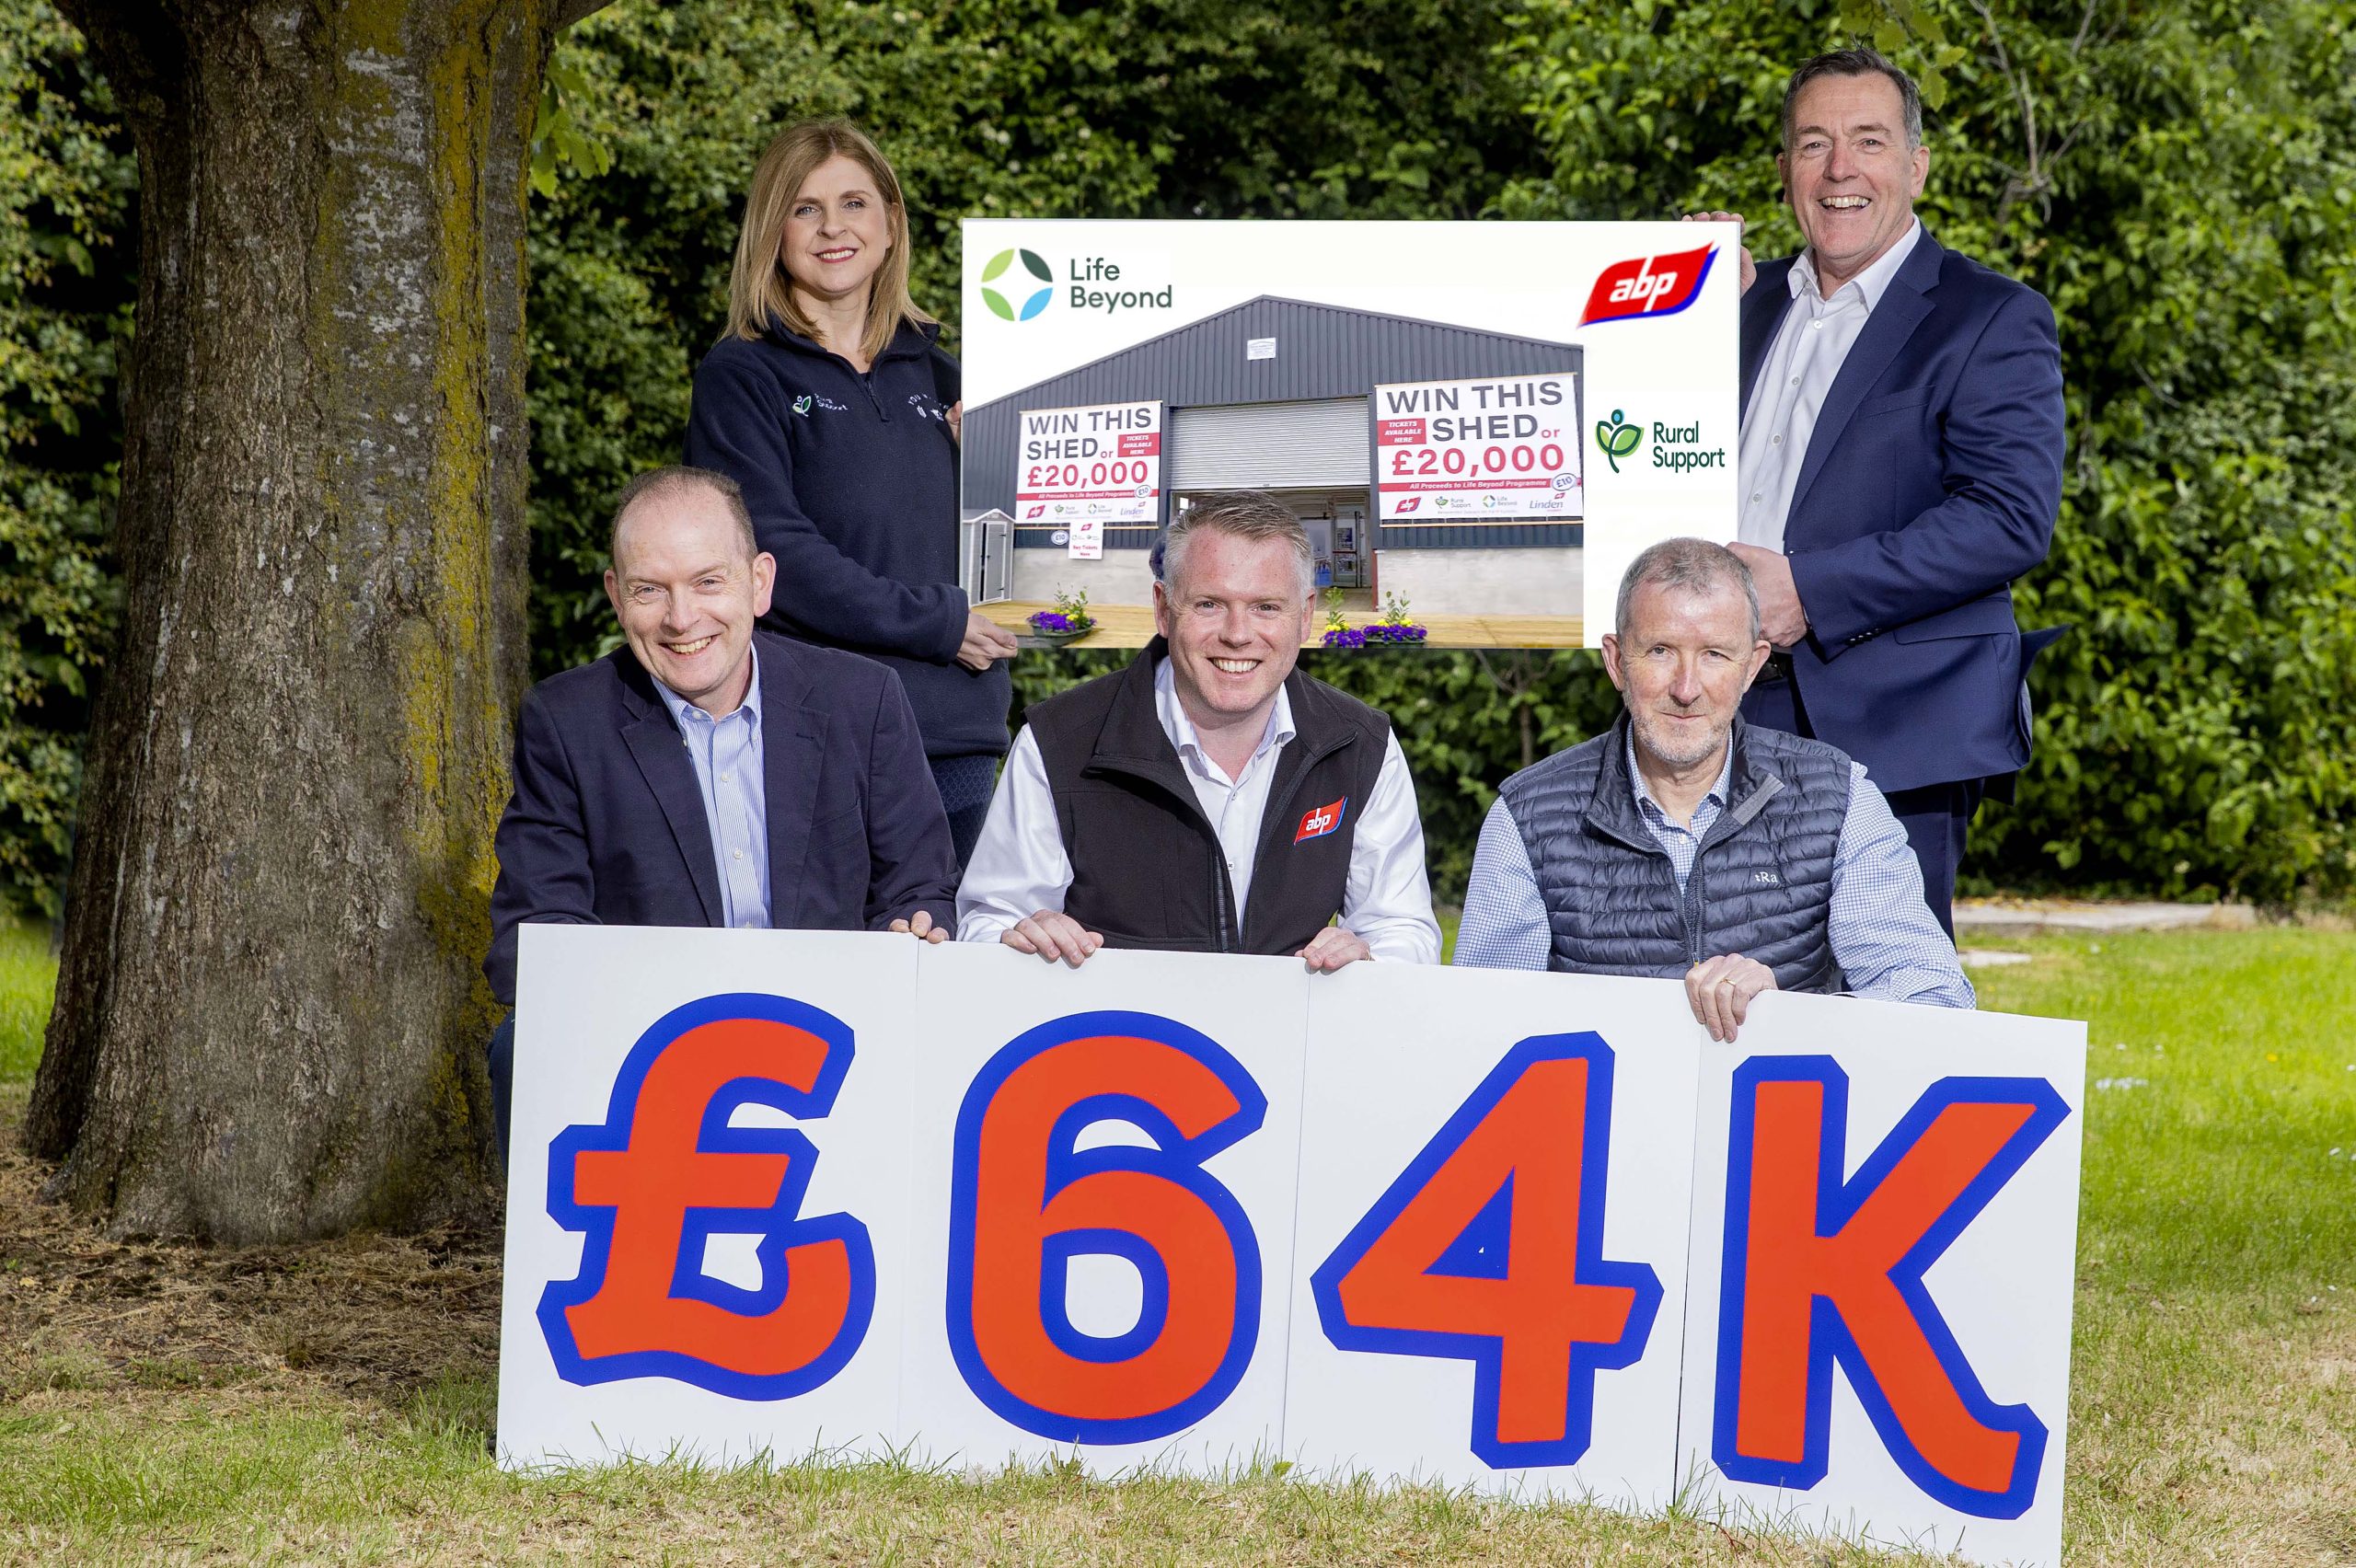 ABP’S charity partnership with Rural Support raises £64,000